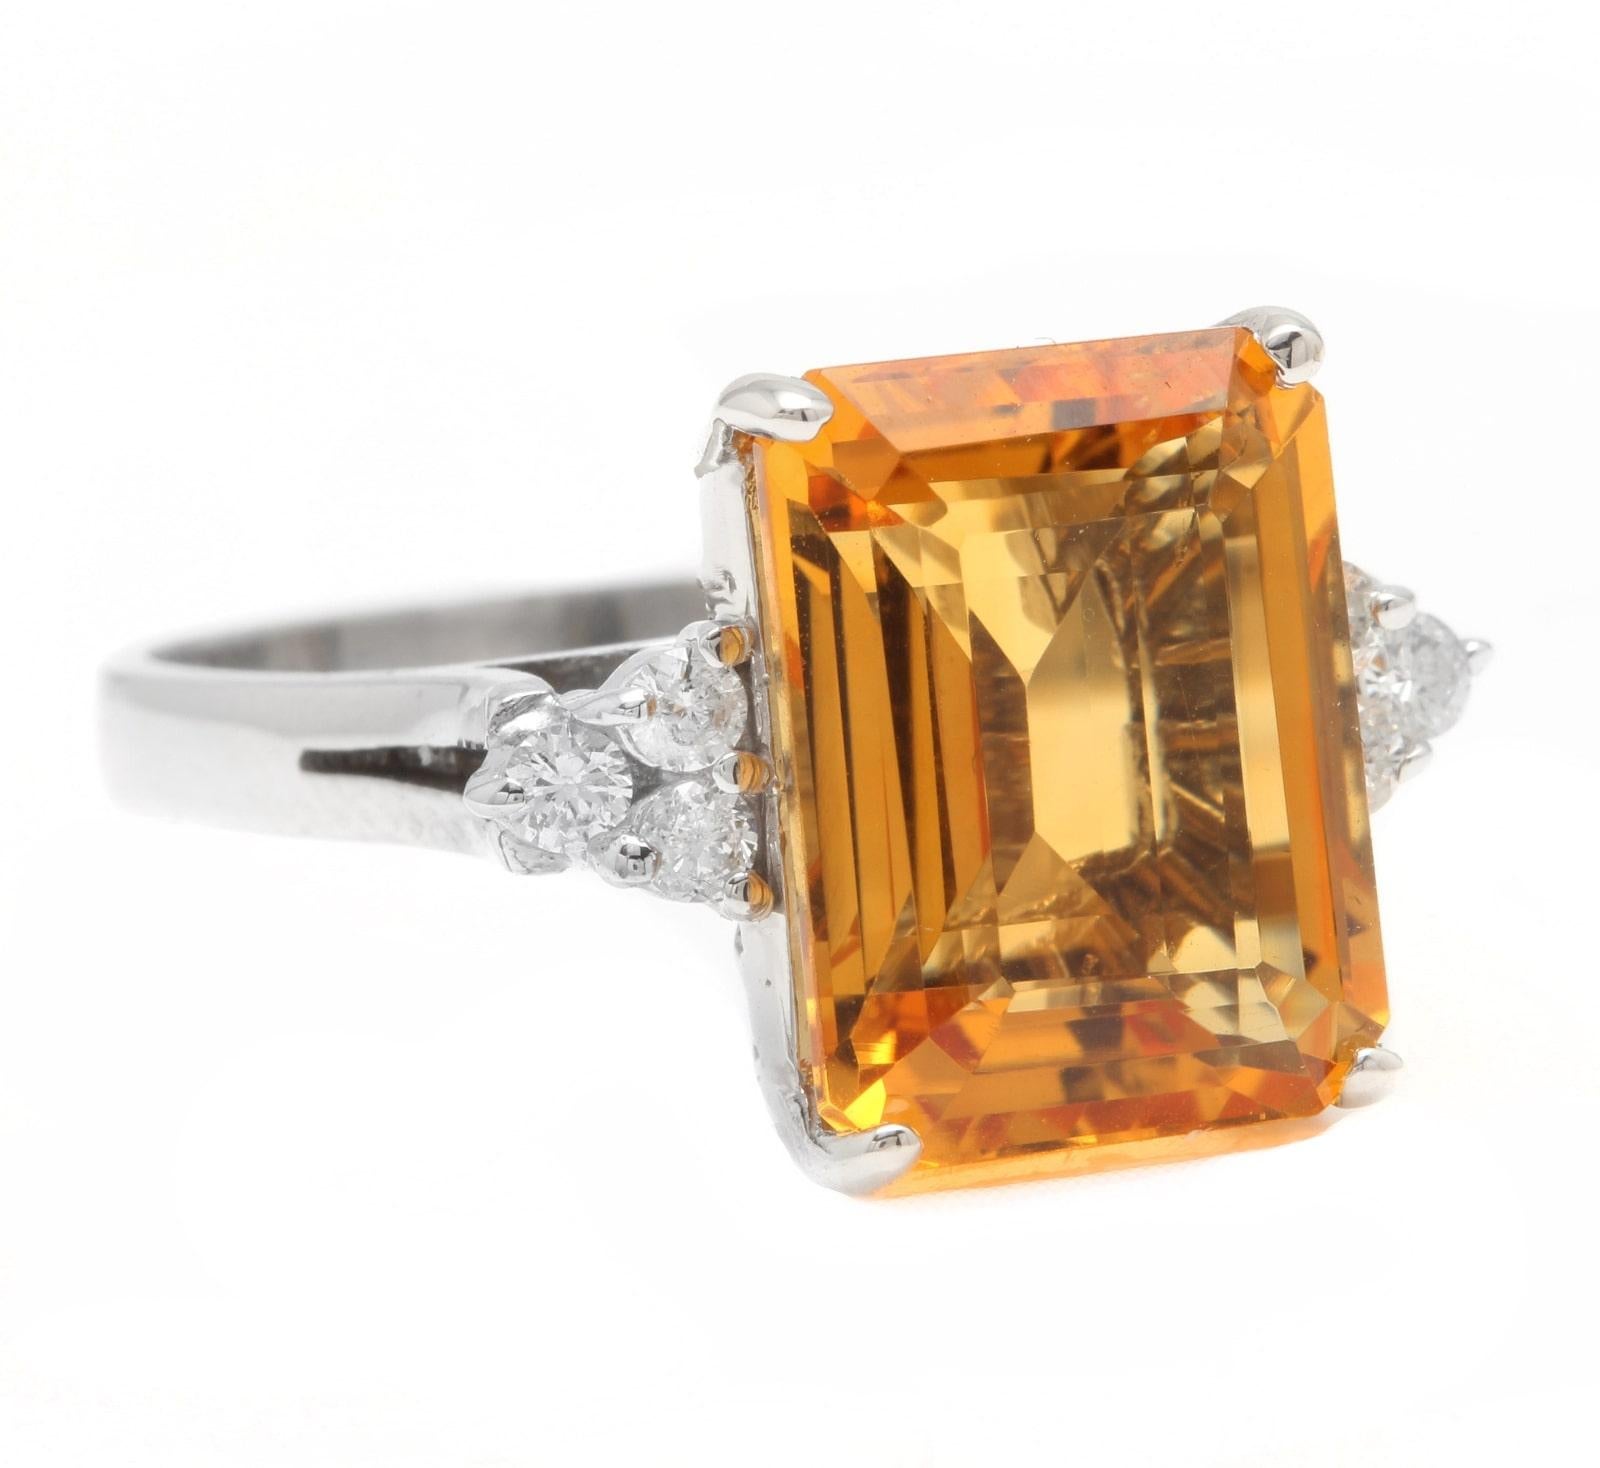 7.35 Carats Exquisite Natural Citrine and Diamond 14K Solid White Gold Ring

Suggested Replacement Value: $5,000.00

Total Natural Citrine Weights: Approx. 7.00 Carats 

Citrine Measures: 14 x 10mm

Natural Round Diamonds Weight: Approx. 0.35 Carats